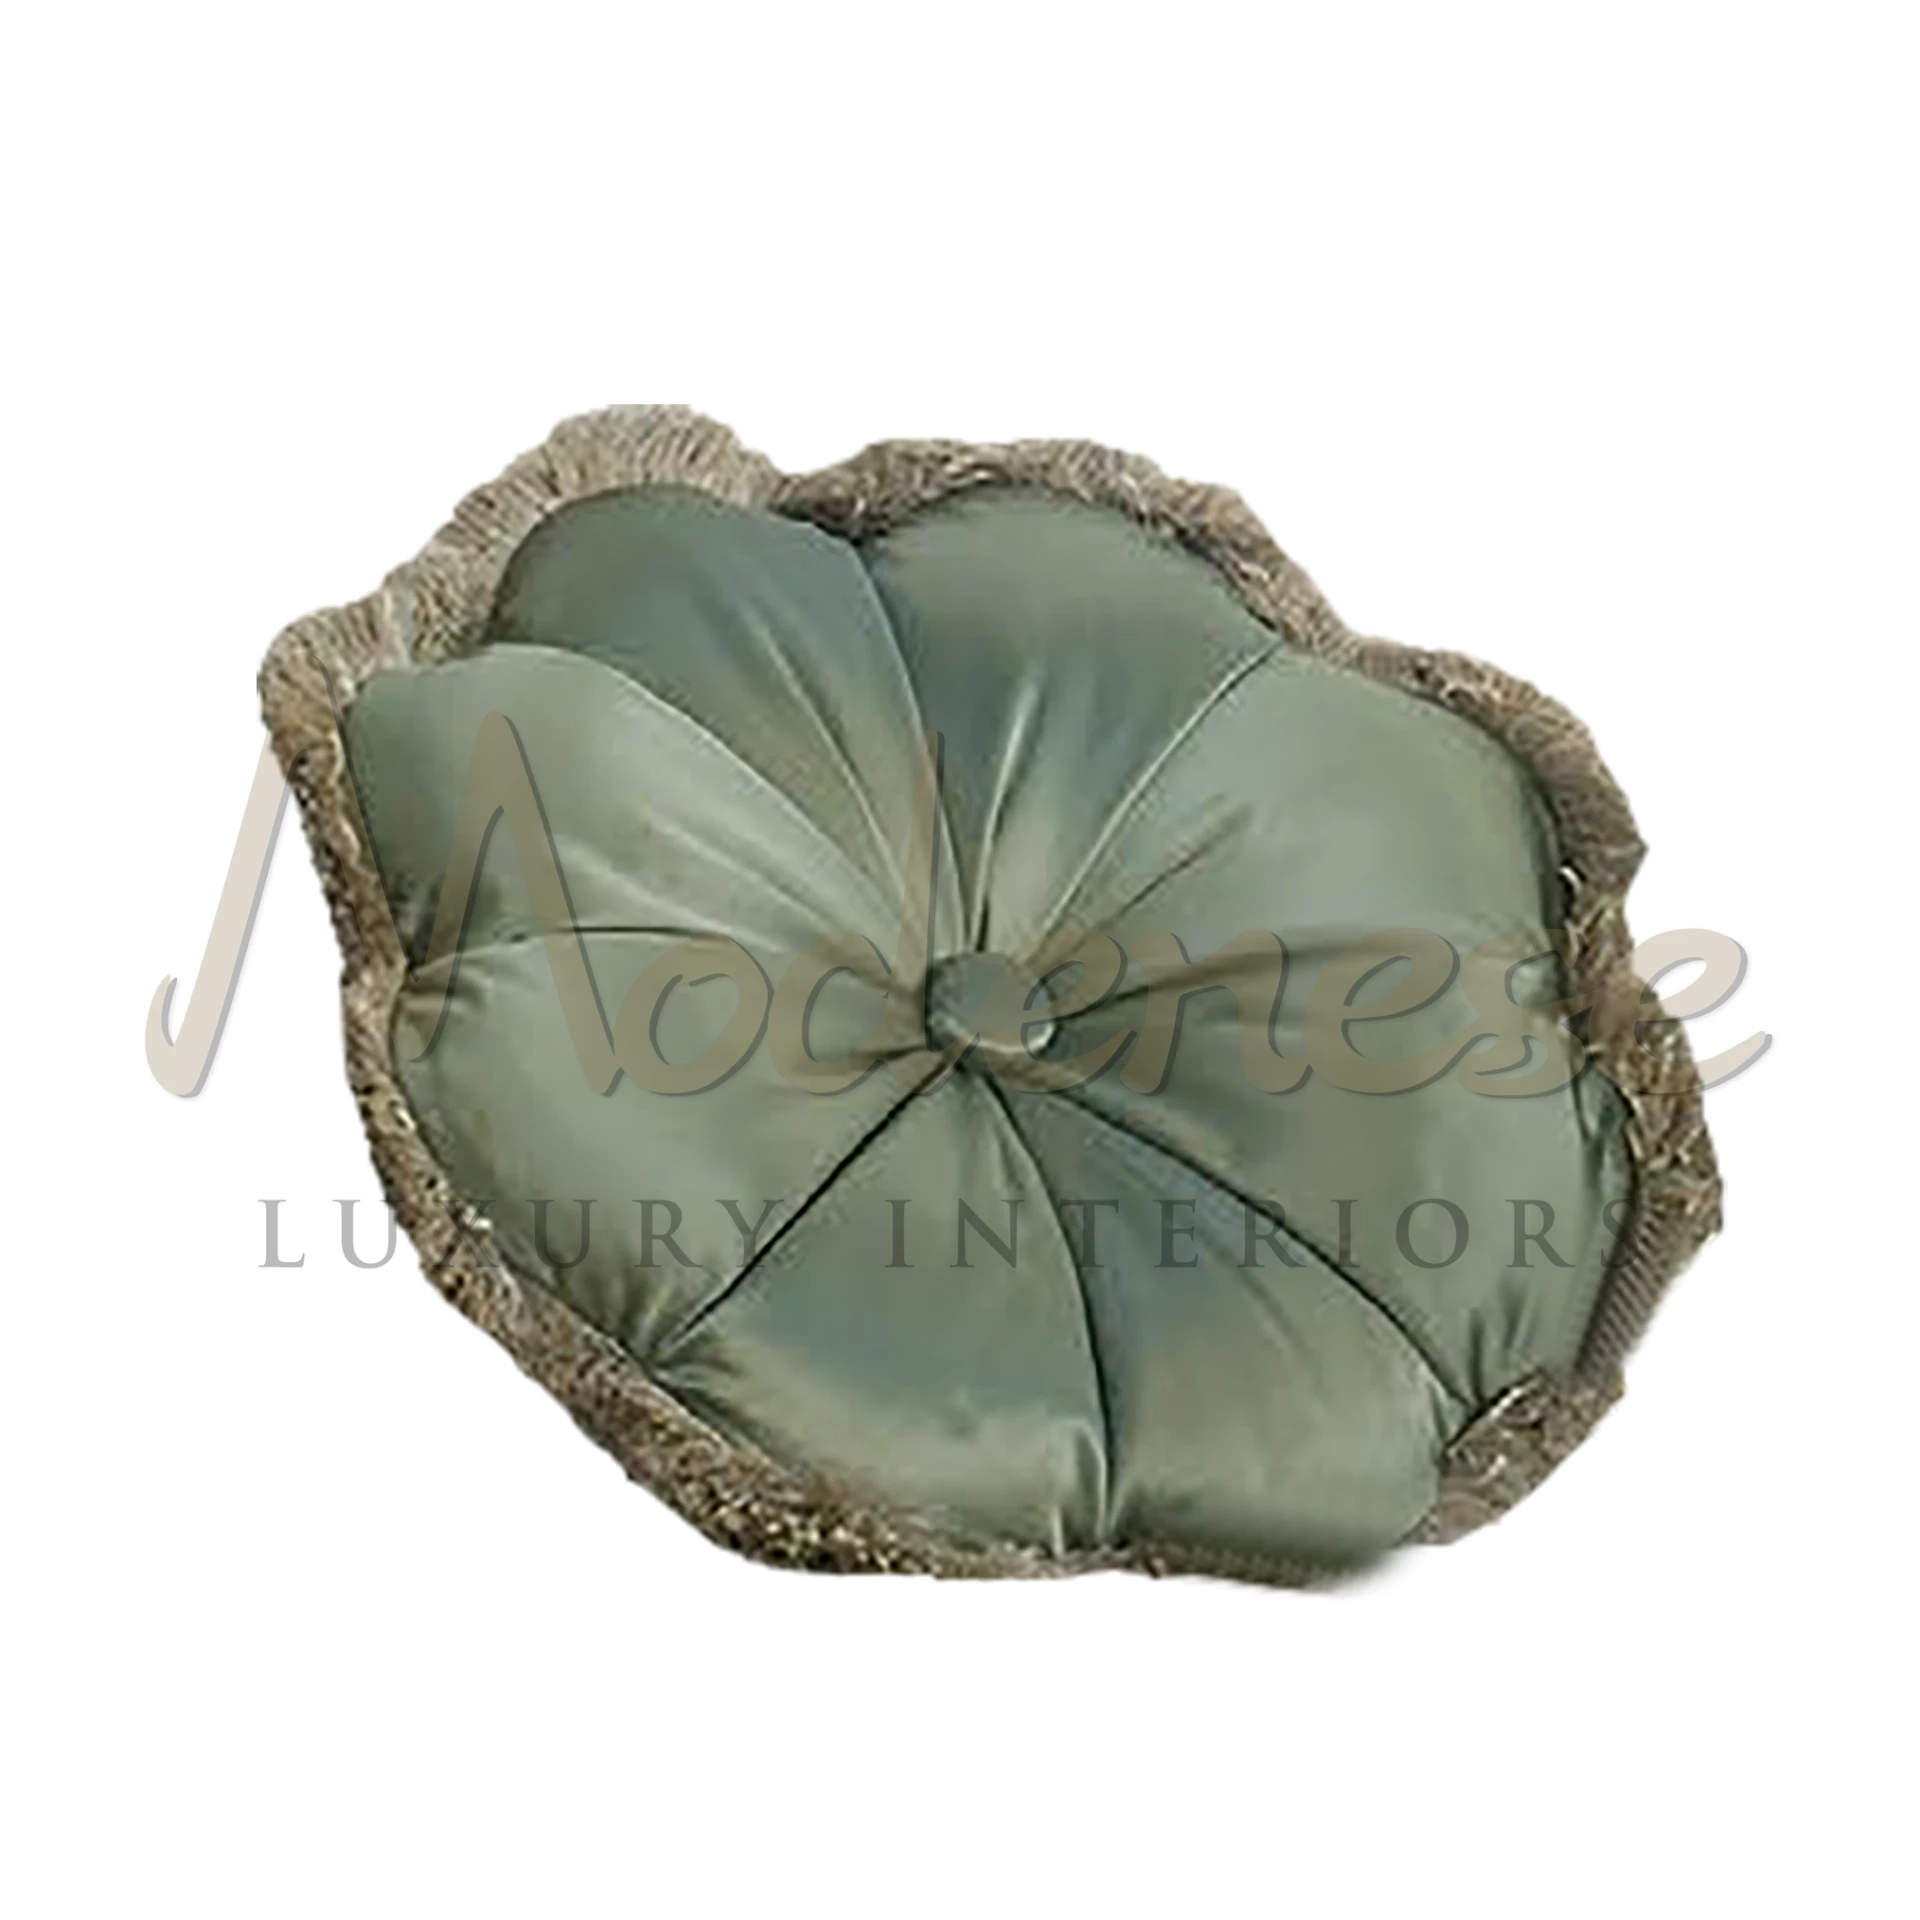 Elegant Green Round Pillow in a luxurious setting, showcasing meticulous craftsmanship and adding charm to the living space.